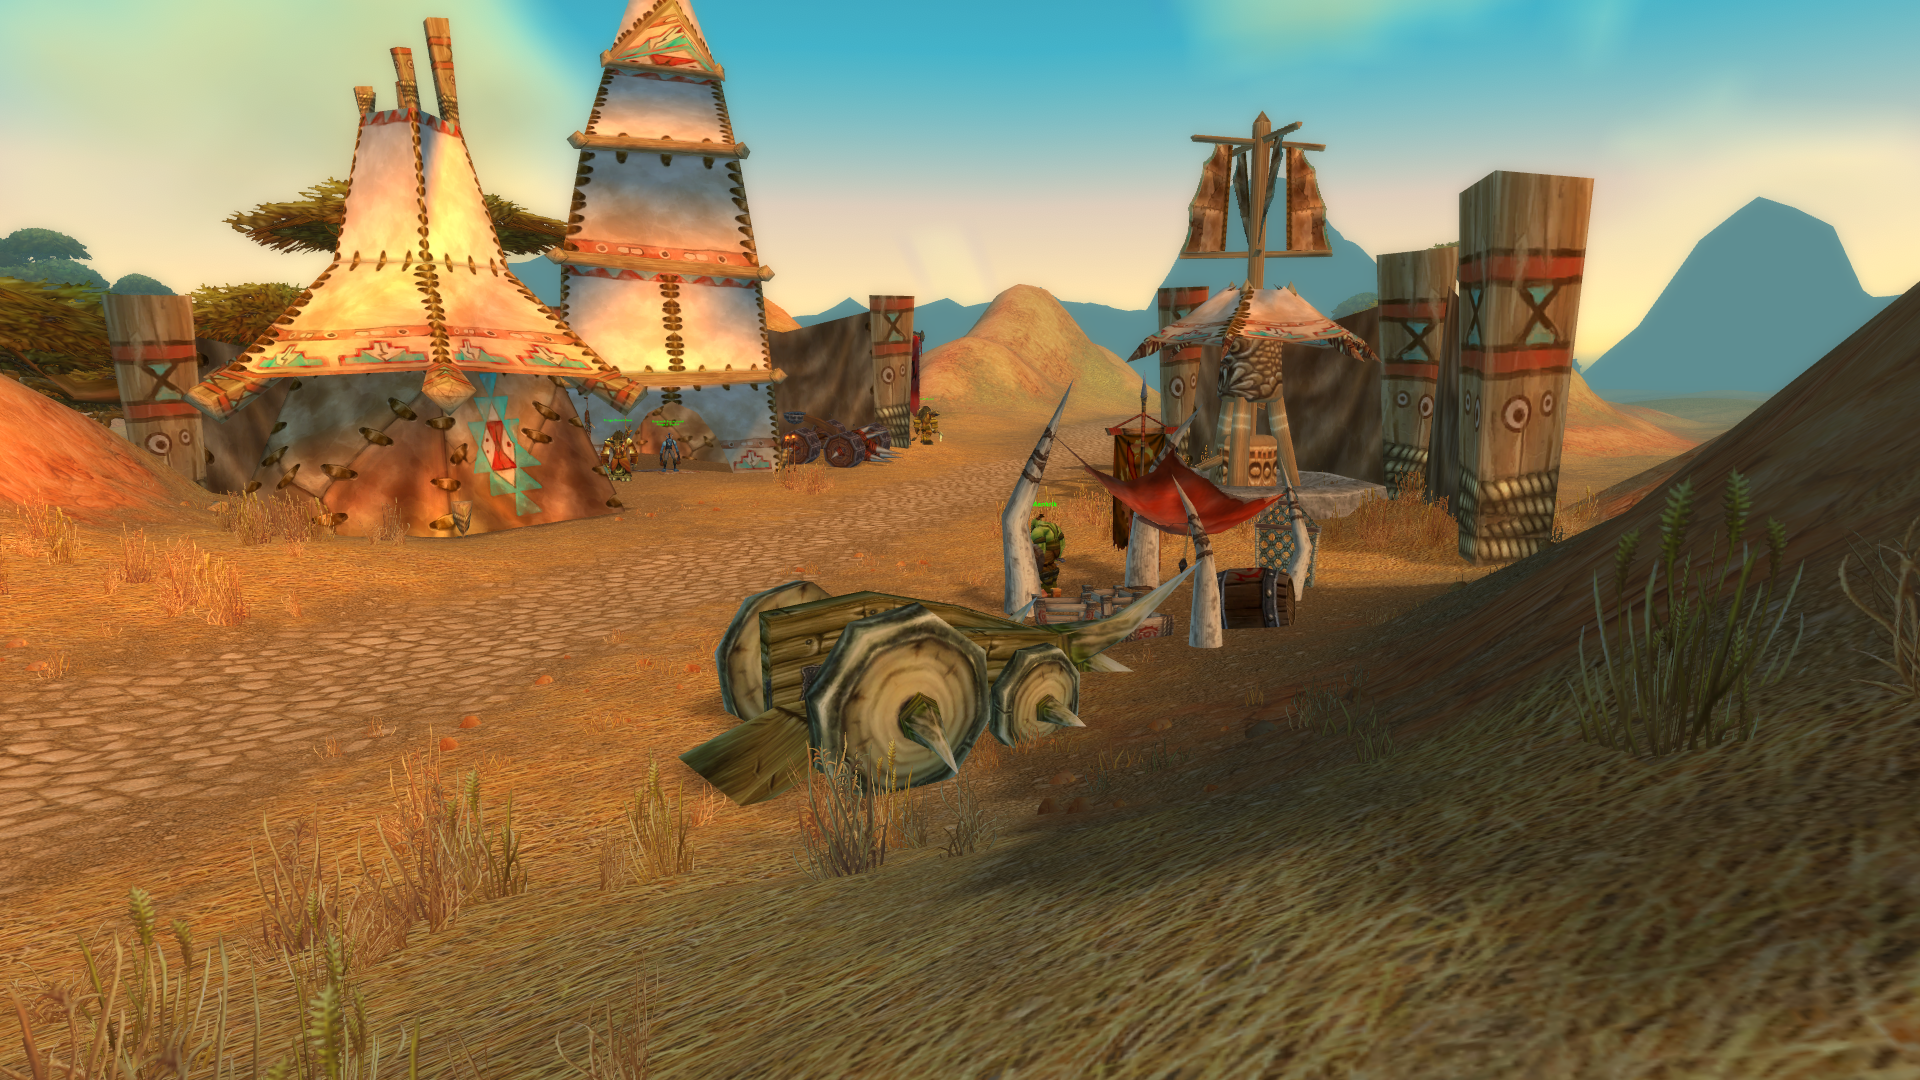 WoW SoD: How to get the Wind Serpent pet for Hunters in WoW